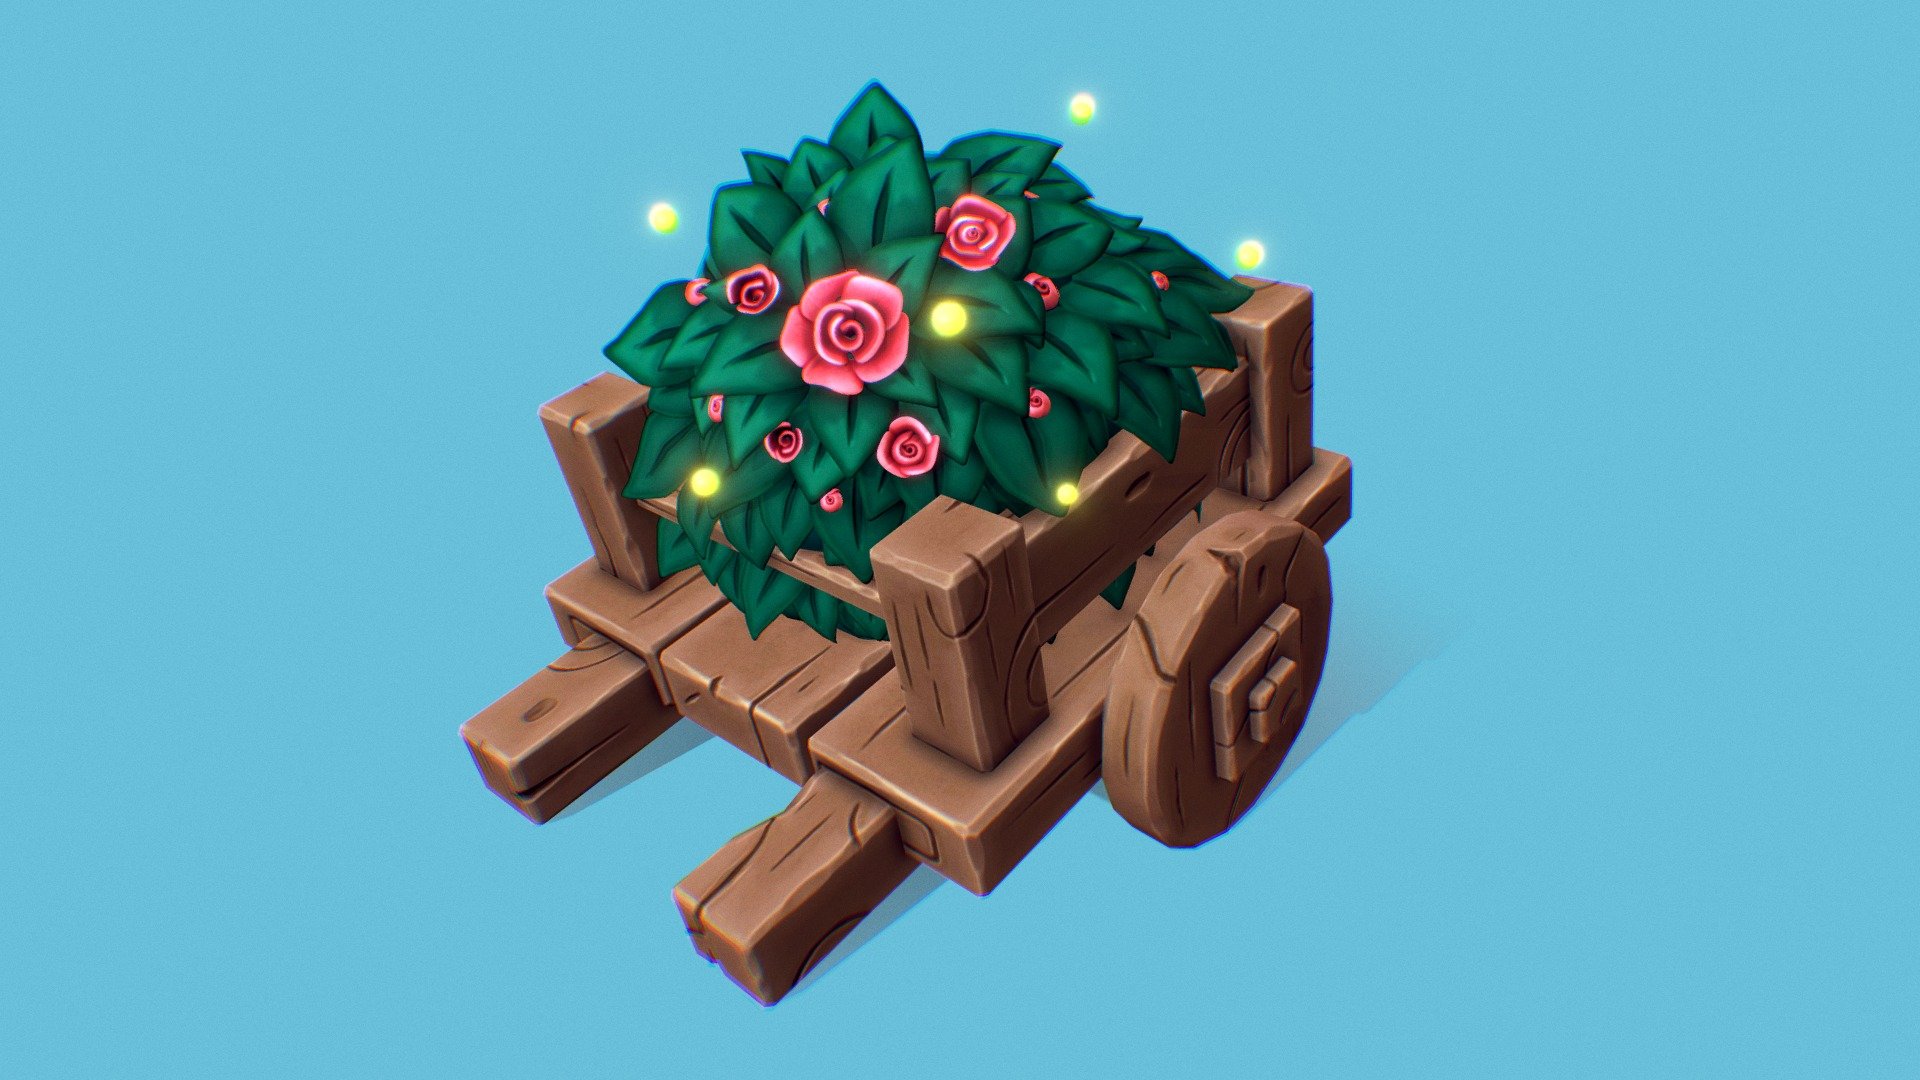 A small prop to practice new tools and workflow. Full project: https://www.artstation.com/artwork/28rJwY
Original work by Daniel Denissenko, link: https://www.artstation.com/artwork/6WAON
Modeled in Blender, sculpted in Zbrush and textured in Substance painter - Cart With Flowers - 3D model by Fatima (@fatimakhat) 3d model